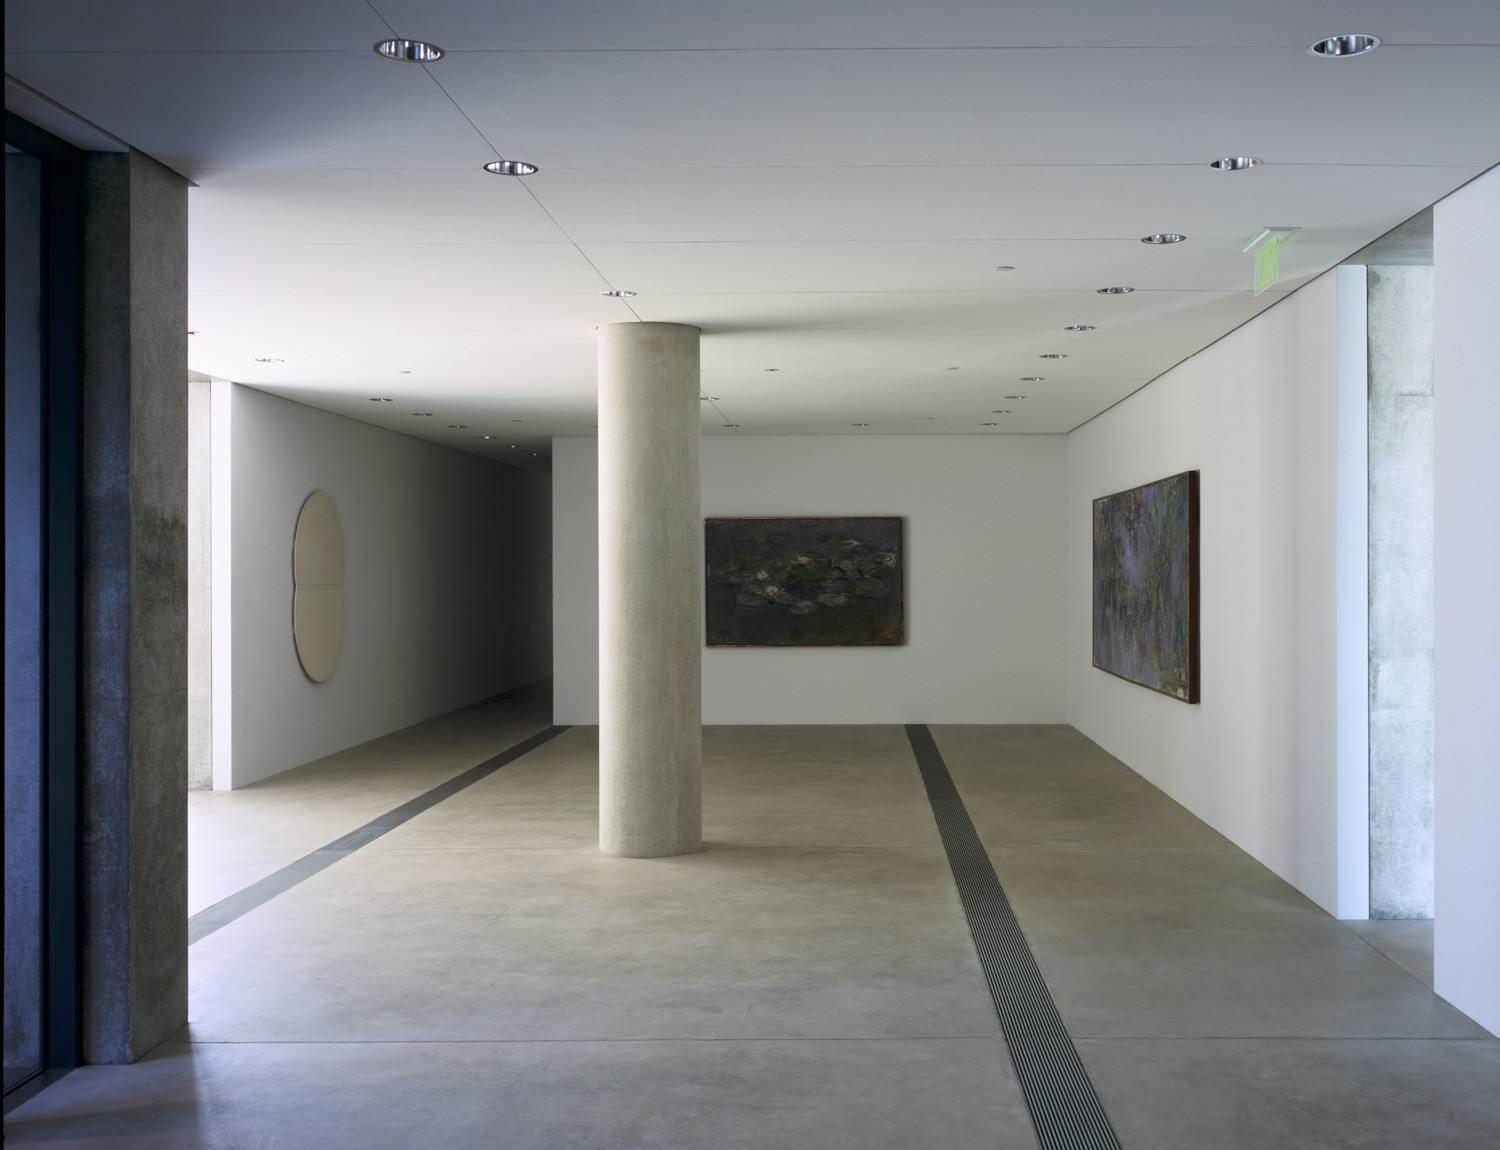 A view of the entrance gallery which includes a Monet Water Lilies painting.